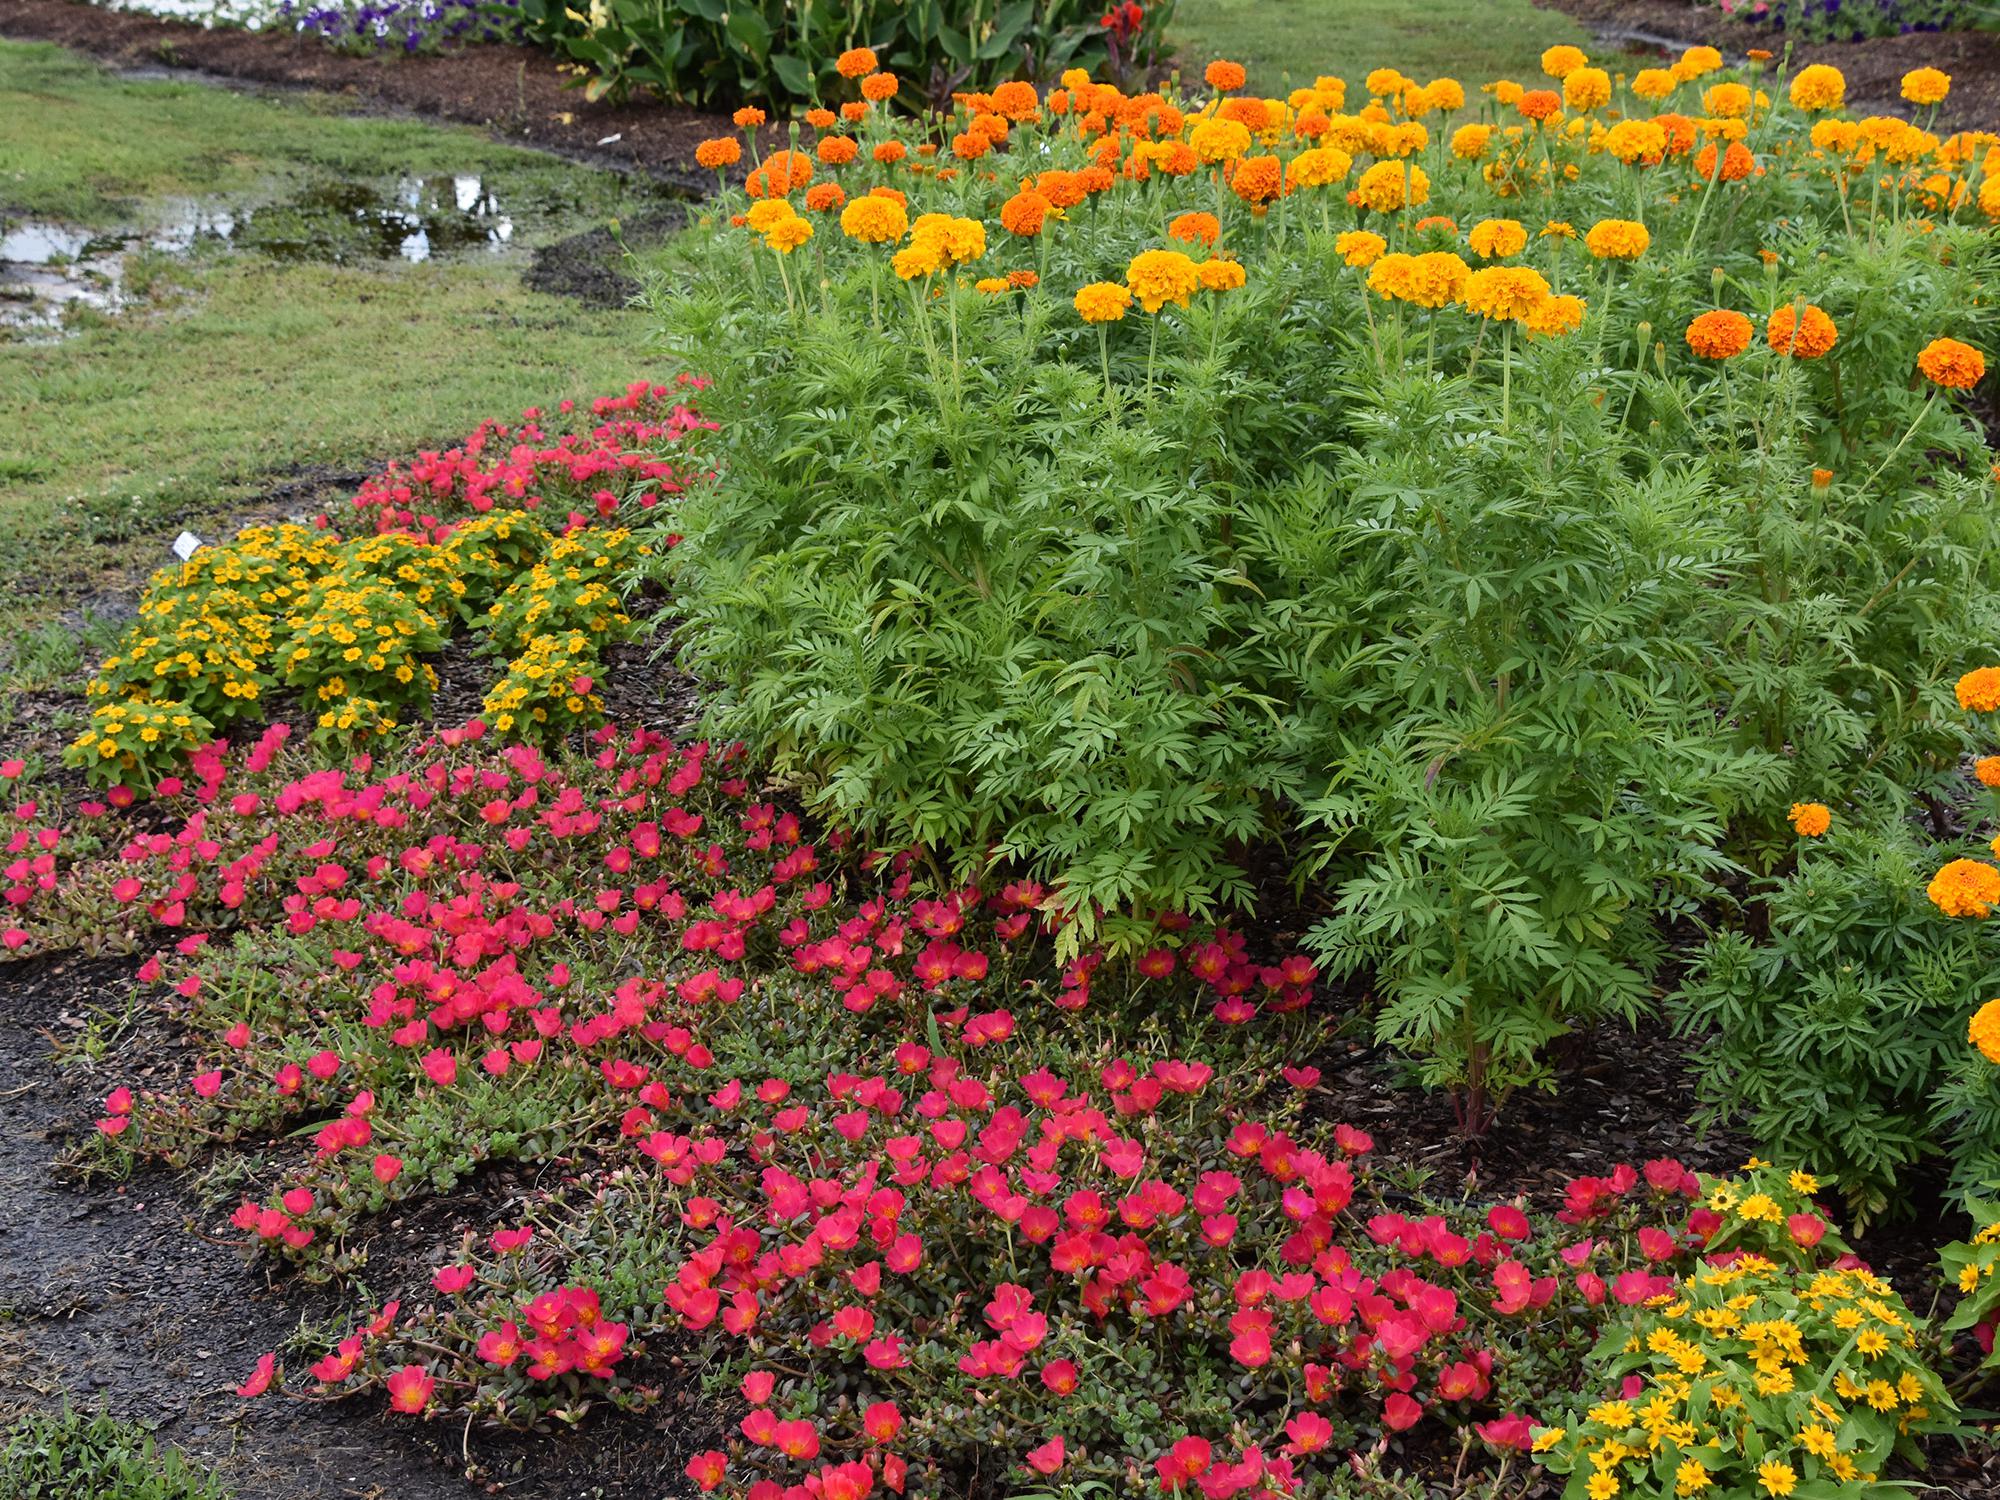 Also called the African marigold, various series of the American marigold can range from 15 inches to 3 feet in height. (Photo by MSU Extension Service/Gary Bachman)